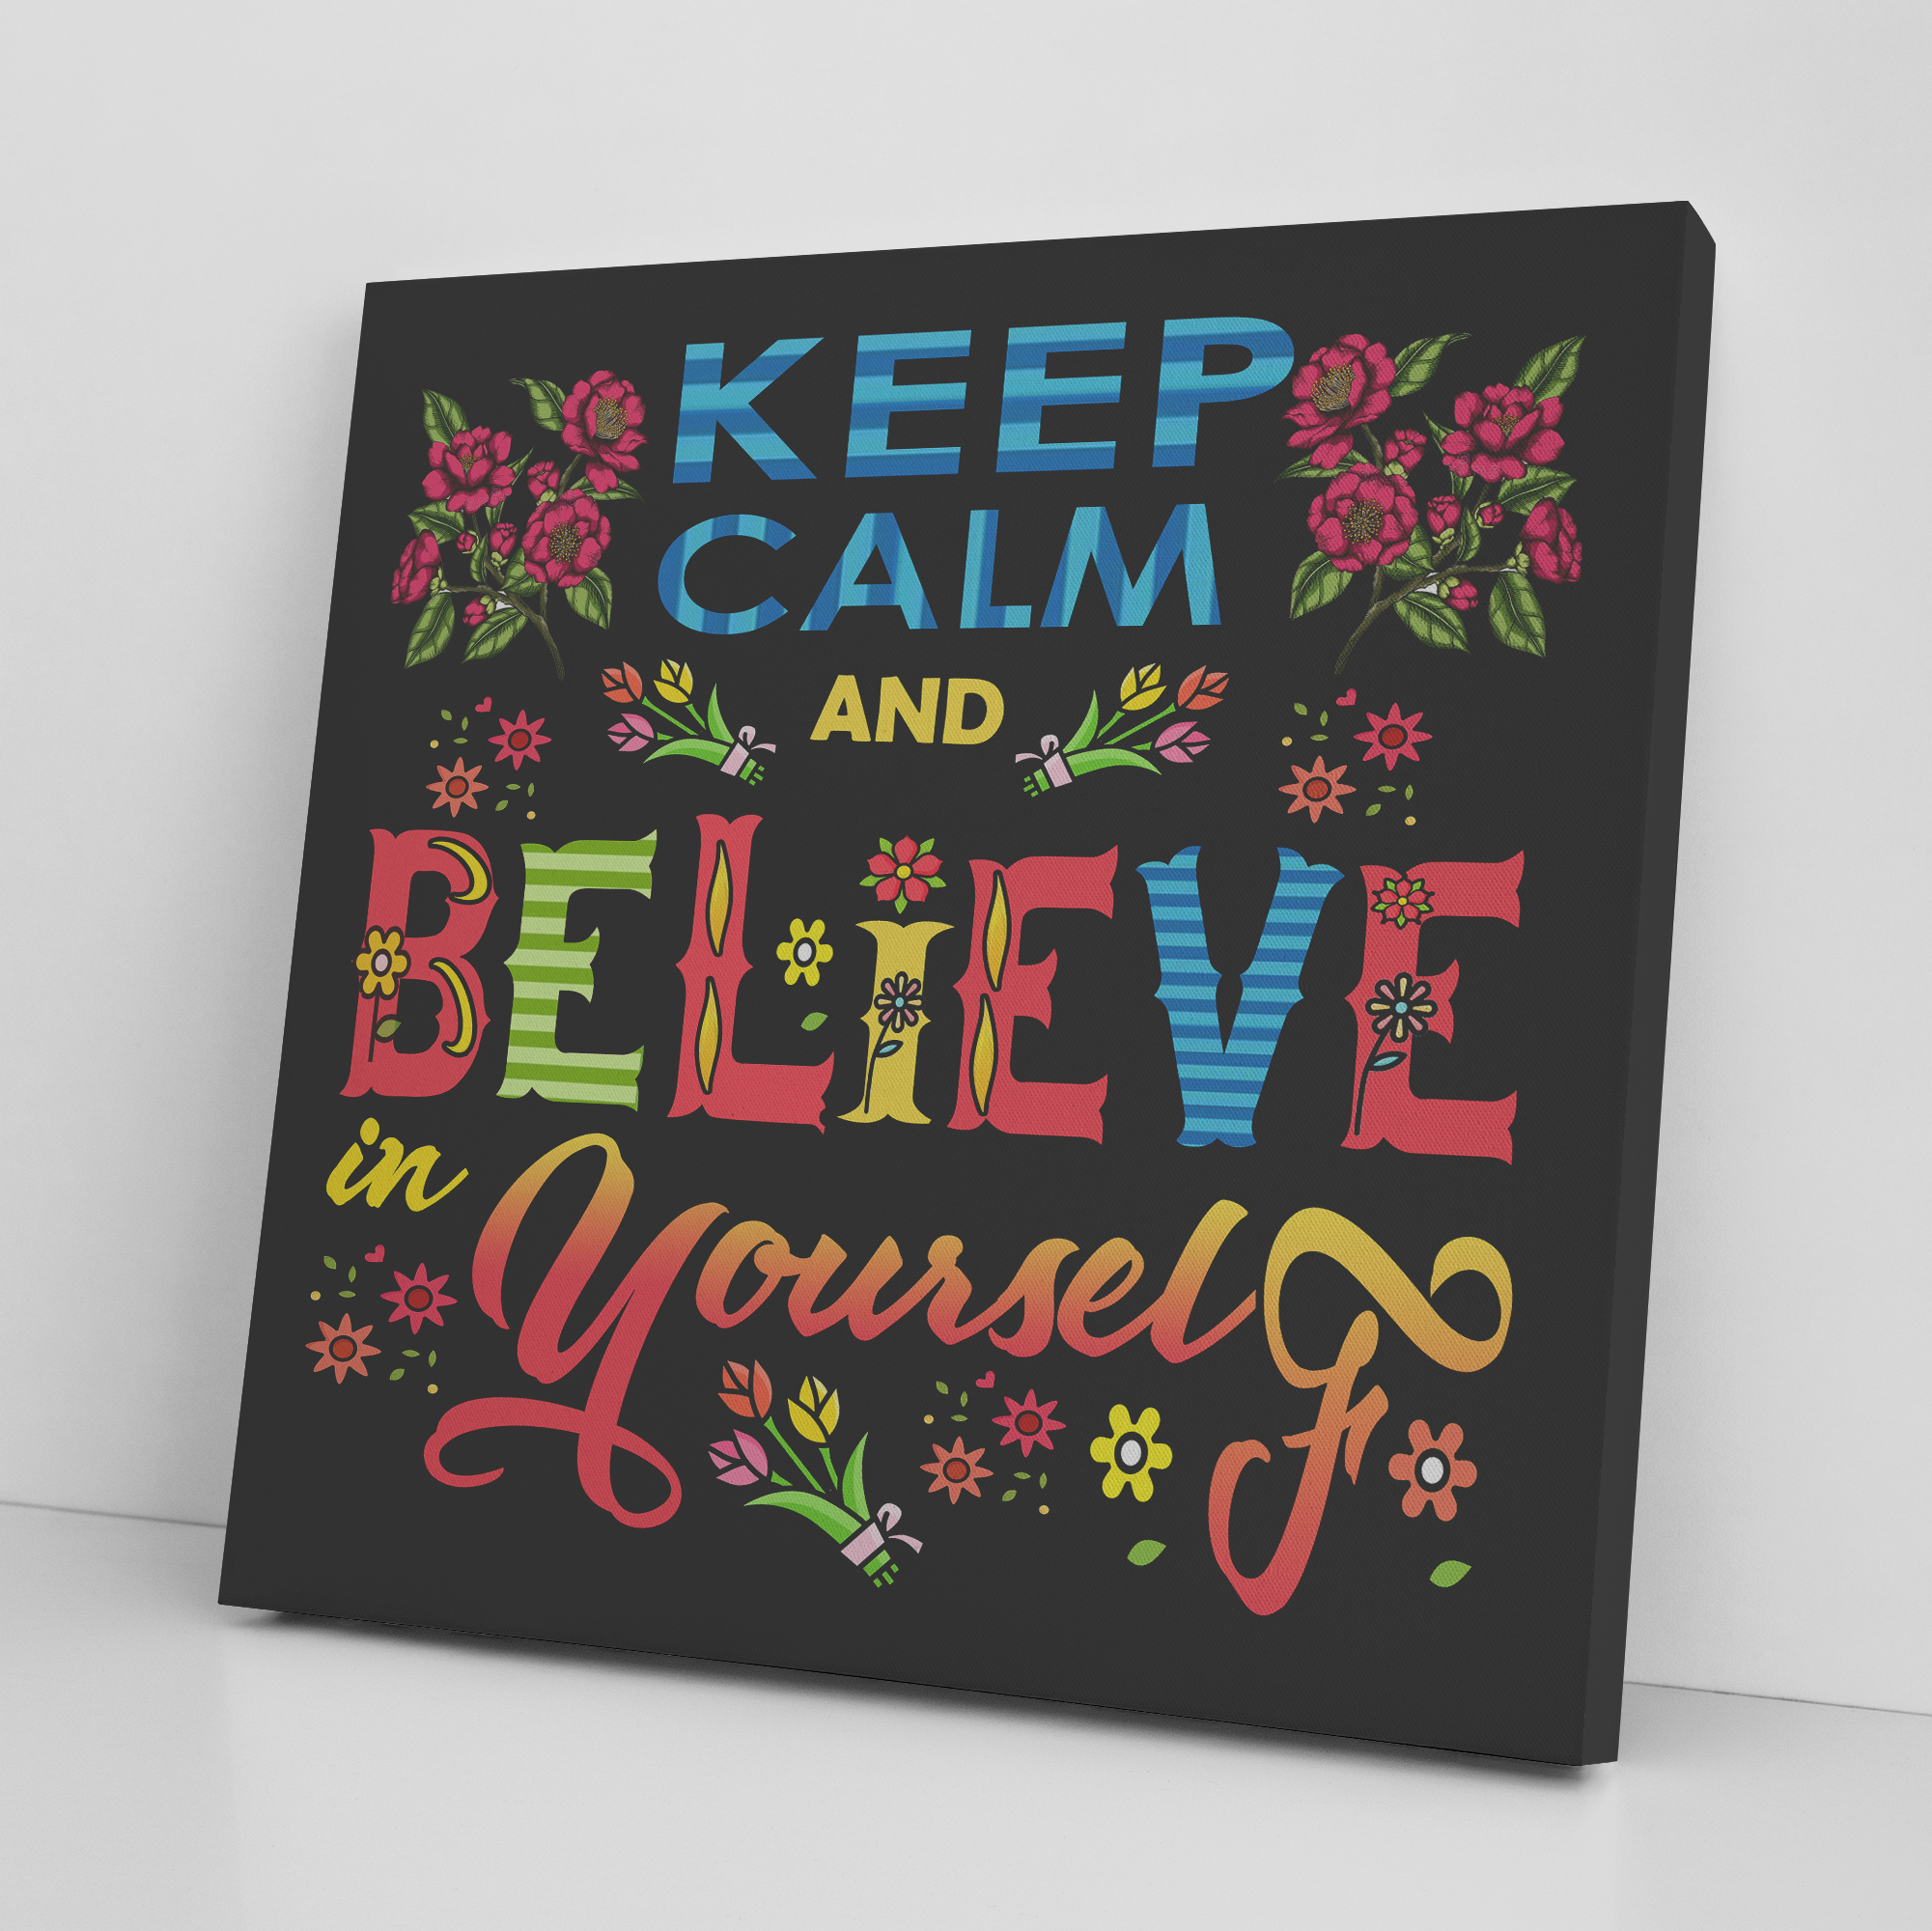 keep calm and believe in yourself